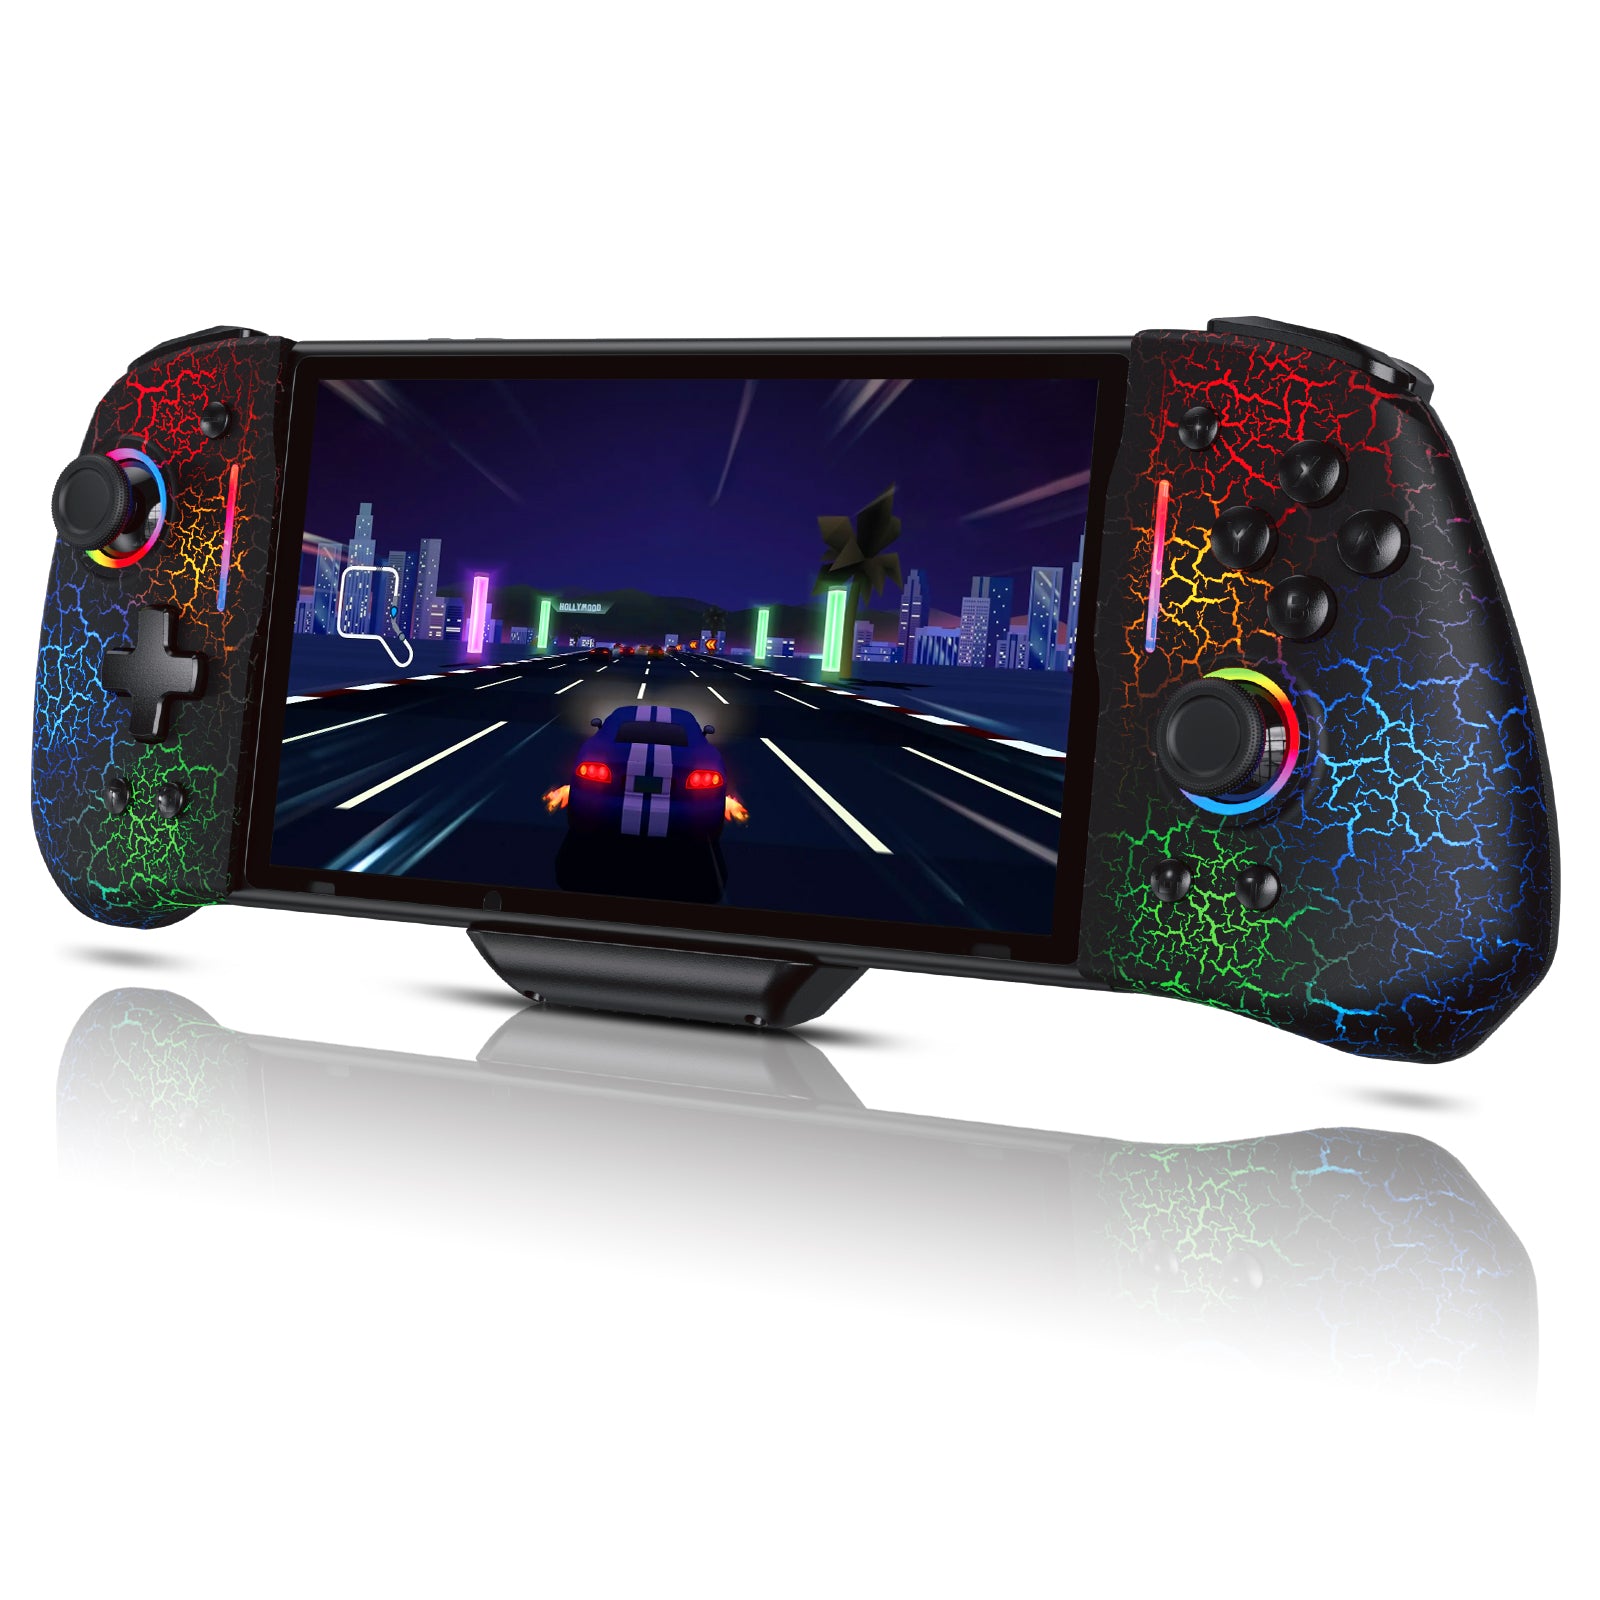 The image displays the black cracked skin and RGB lighting effects of the Bluetooth controller